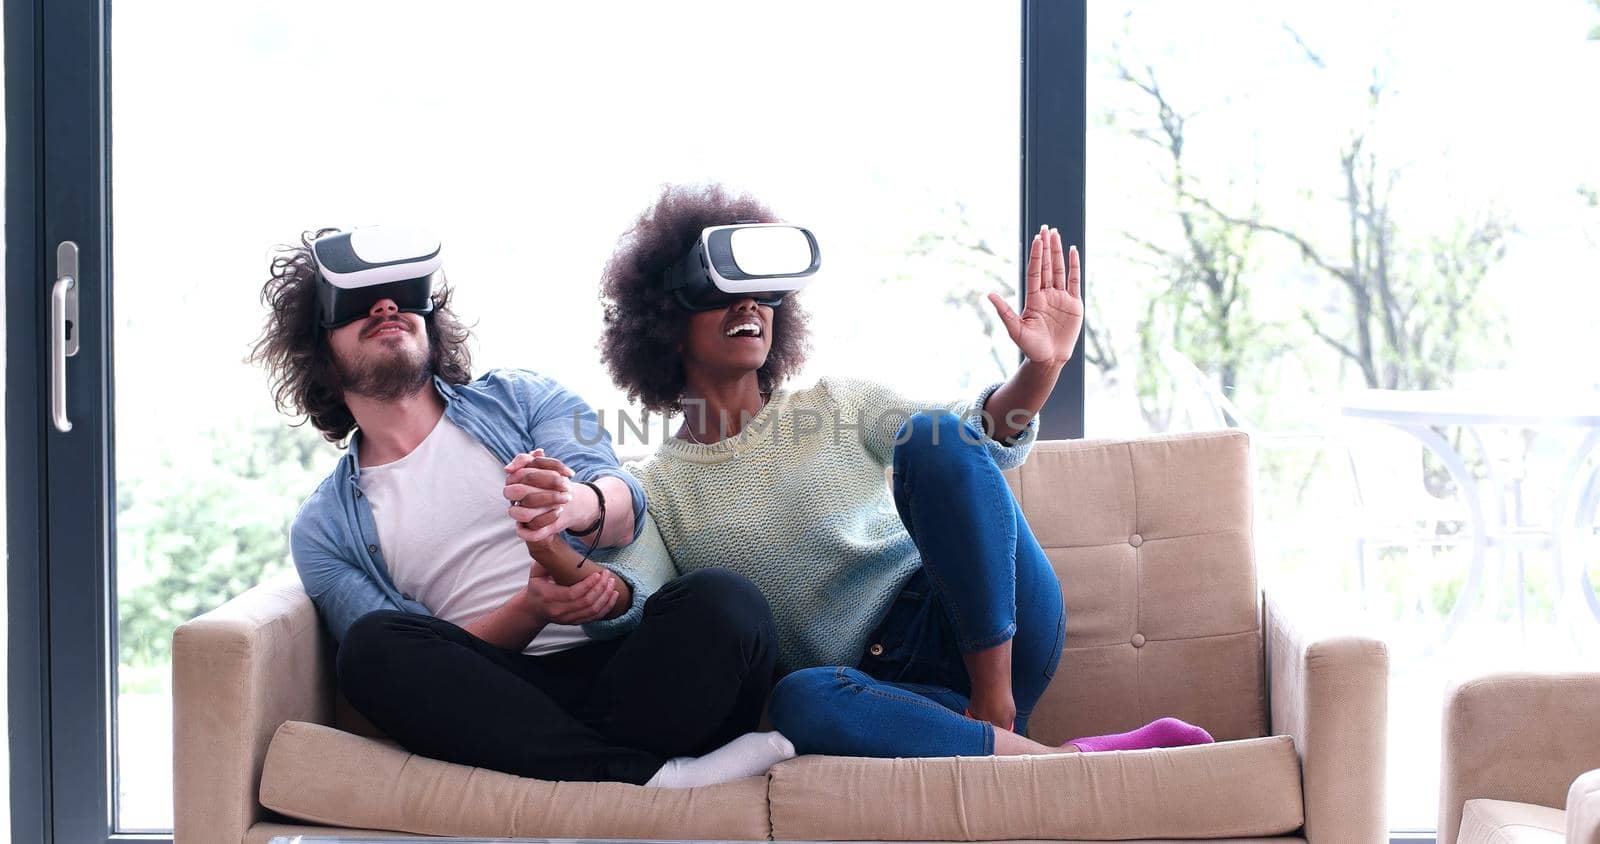 Multiethnic Couple using virtual reality headset in living room at home  people playing game with new trends technology